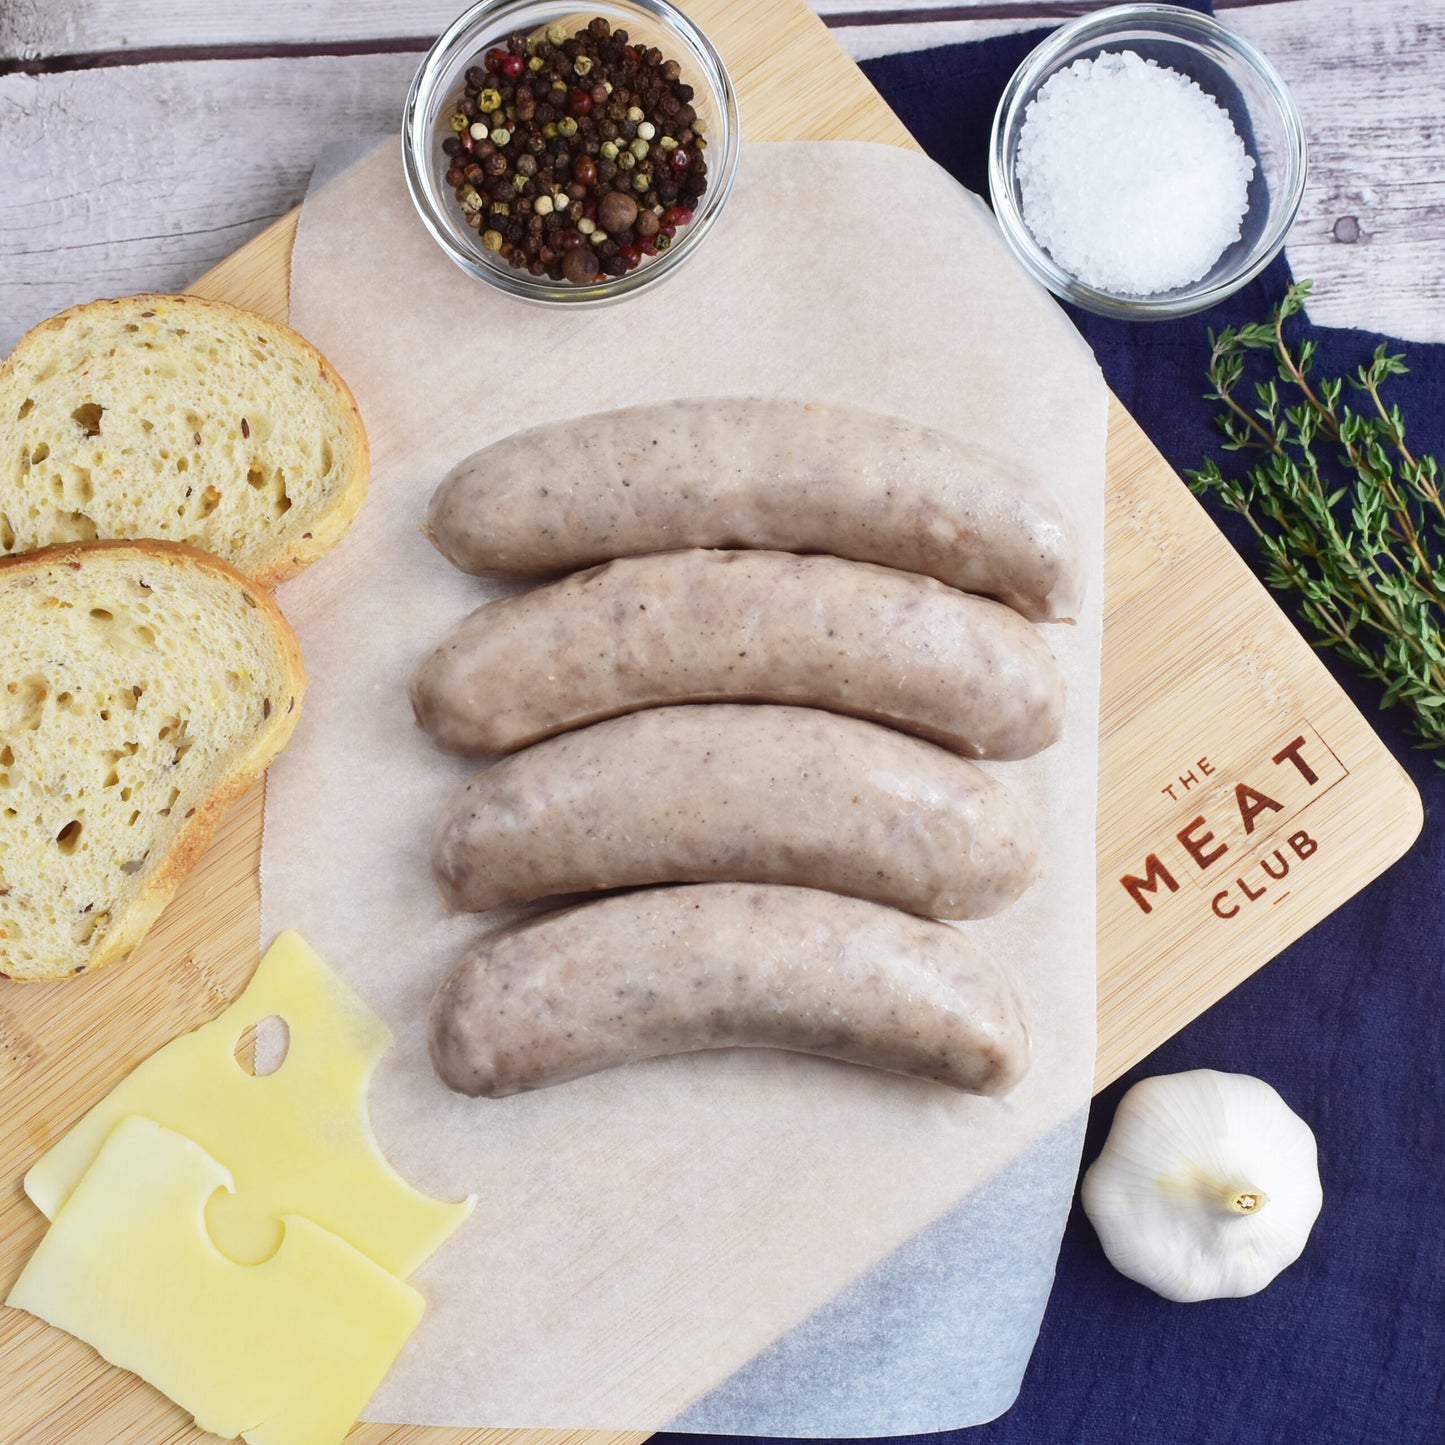 Free Range Australian Kid Friendly BBQ Sausages from The Meat Club